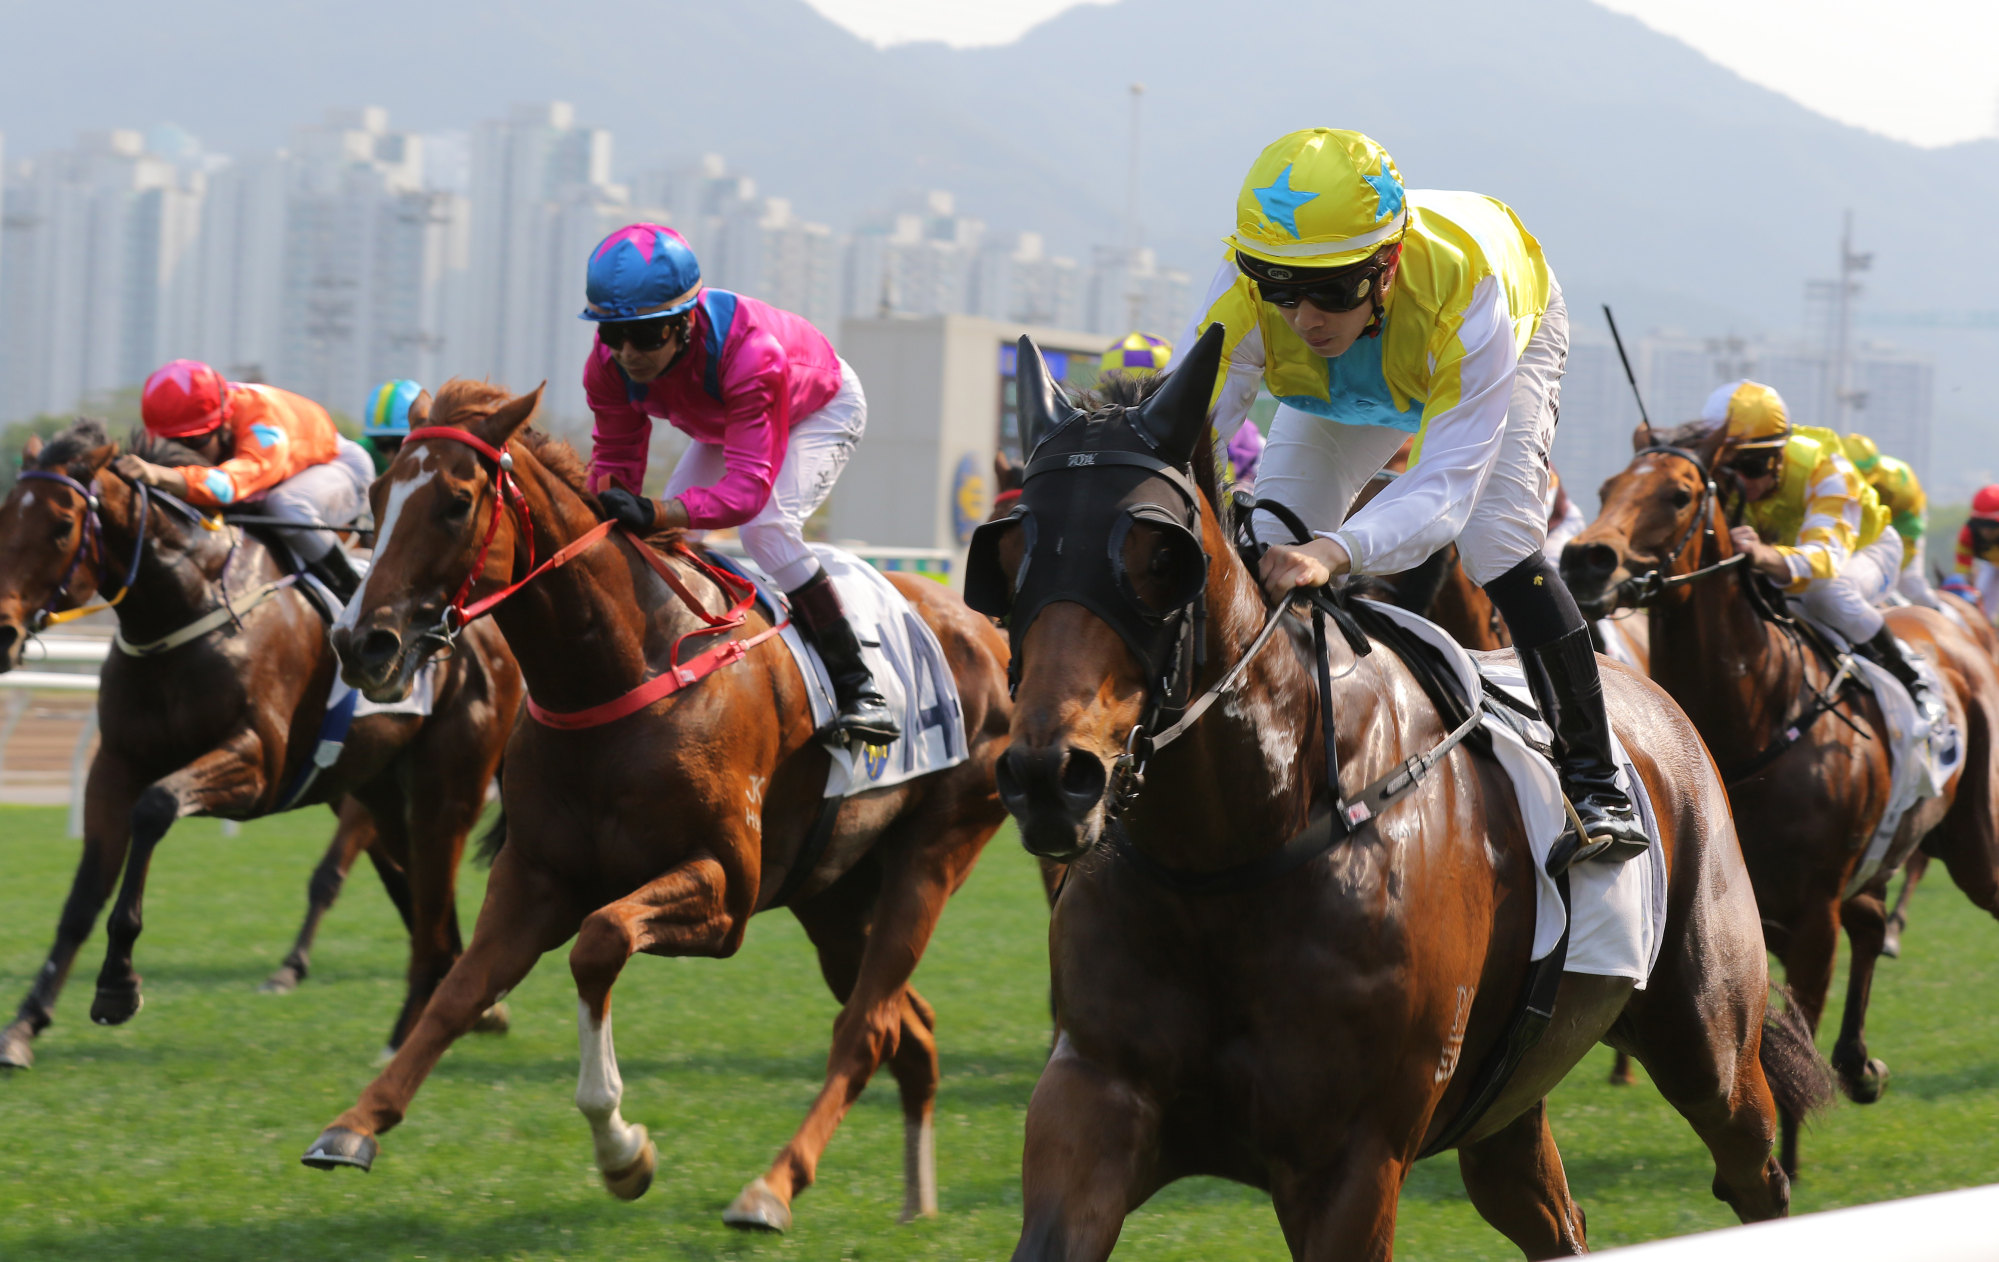 Cheval Valiant strides to victory under Angus Chung.